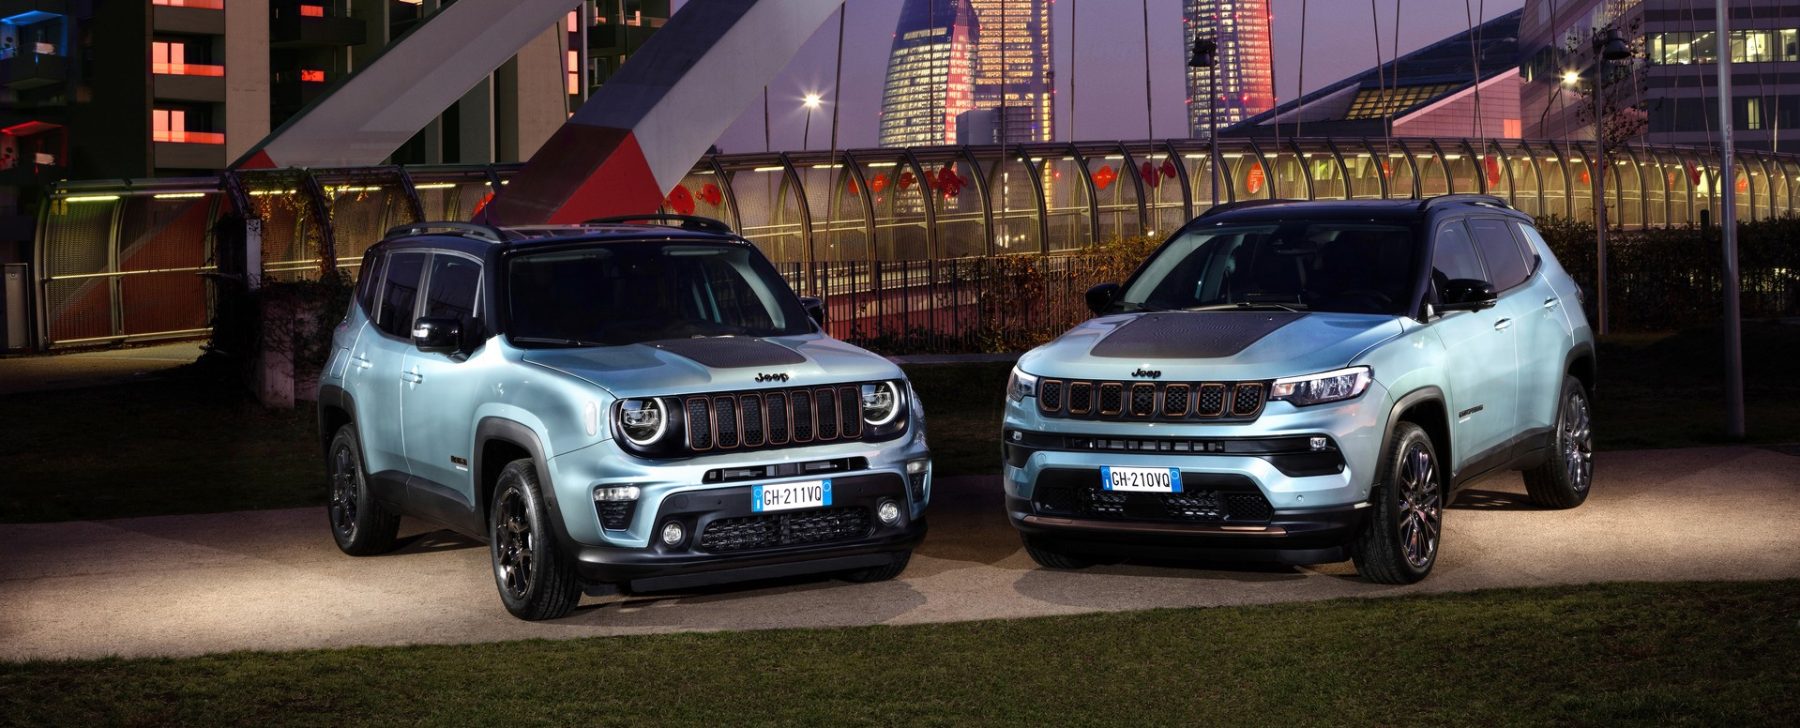 Jeep Renegade eHybrid y Jeep Compass eHybrid